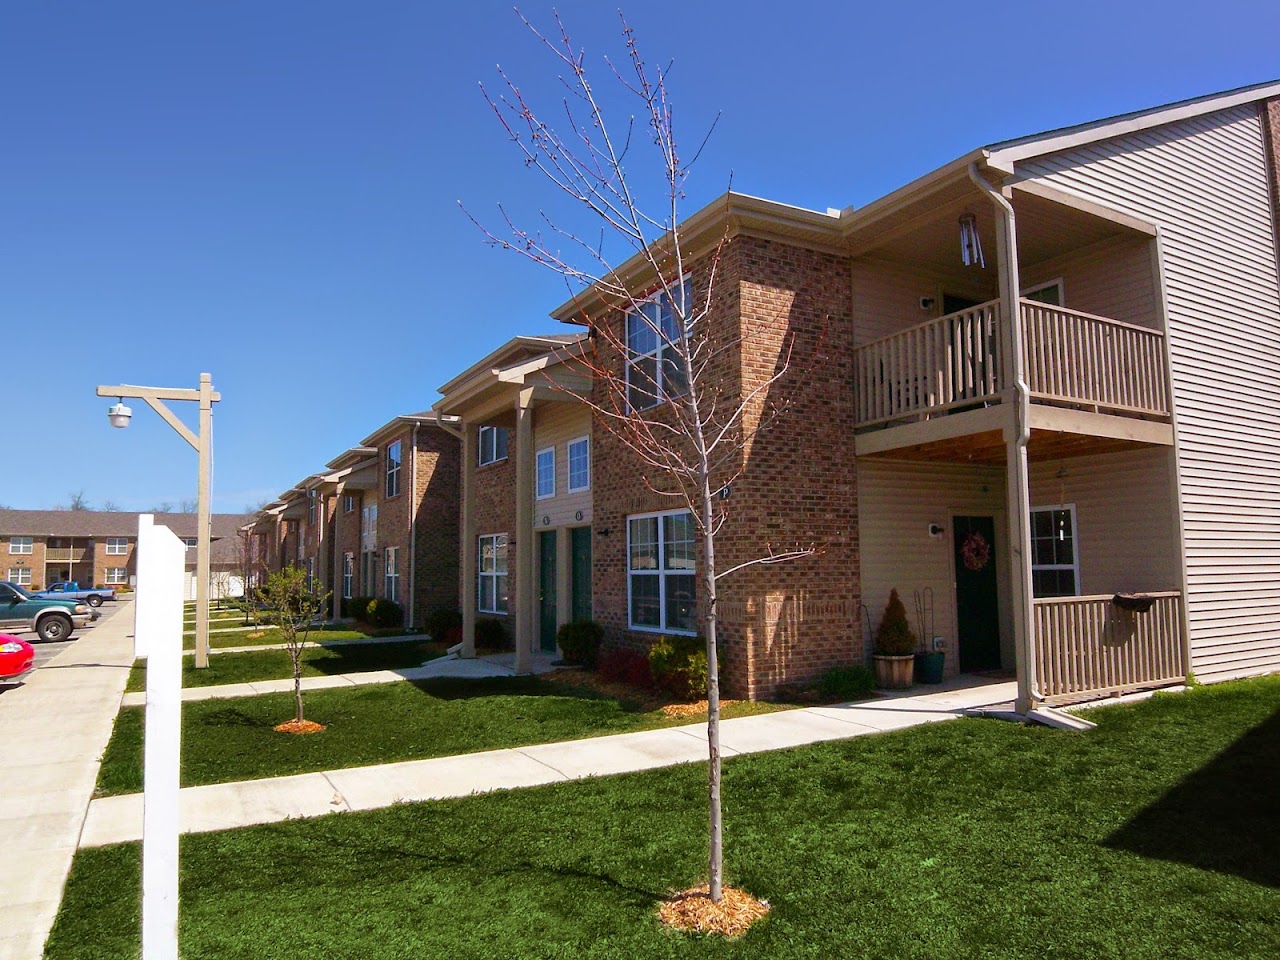 Photo of MAPLE TREE APTS II. Affordable housing located at 1405 W 18TH ST LA PORTE, IN 46350